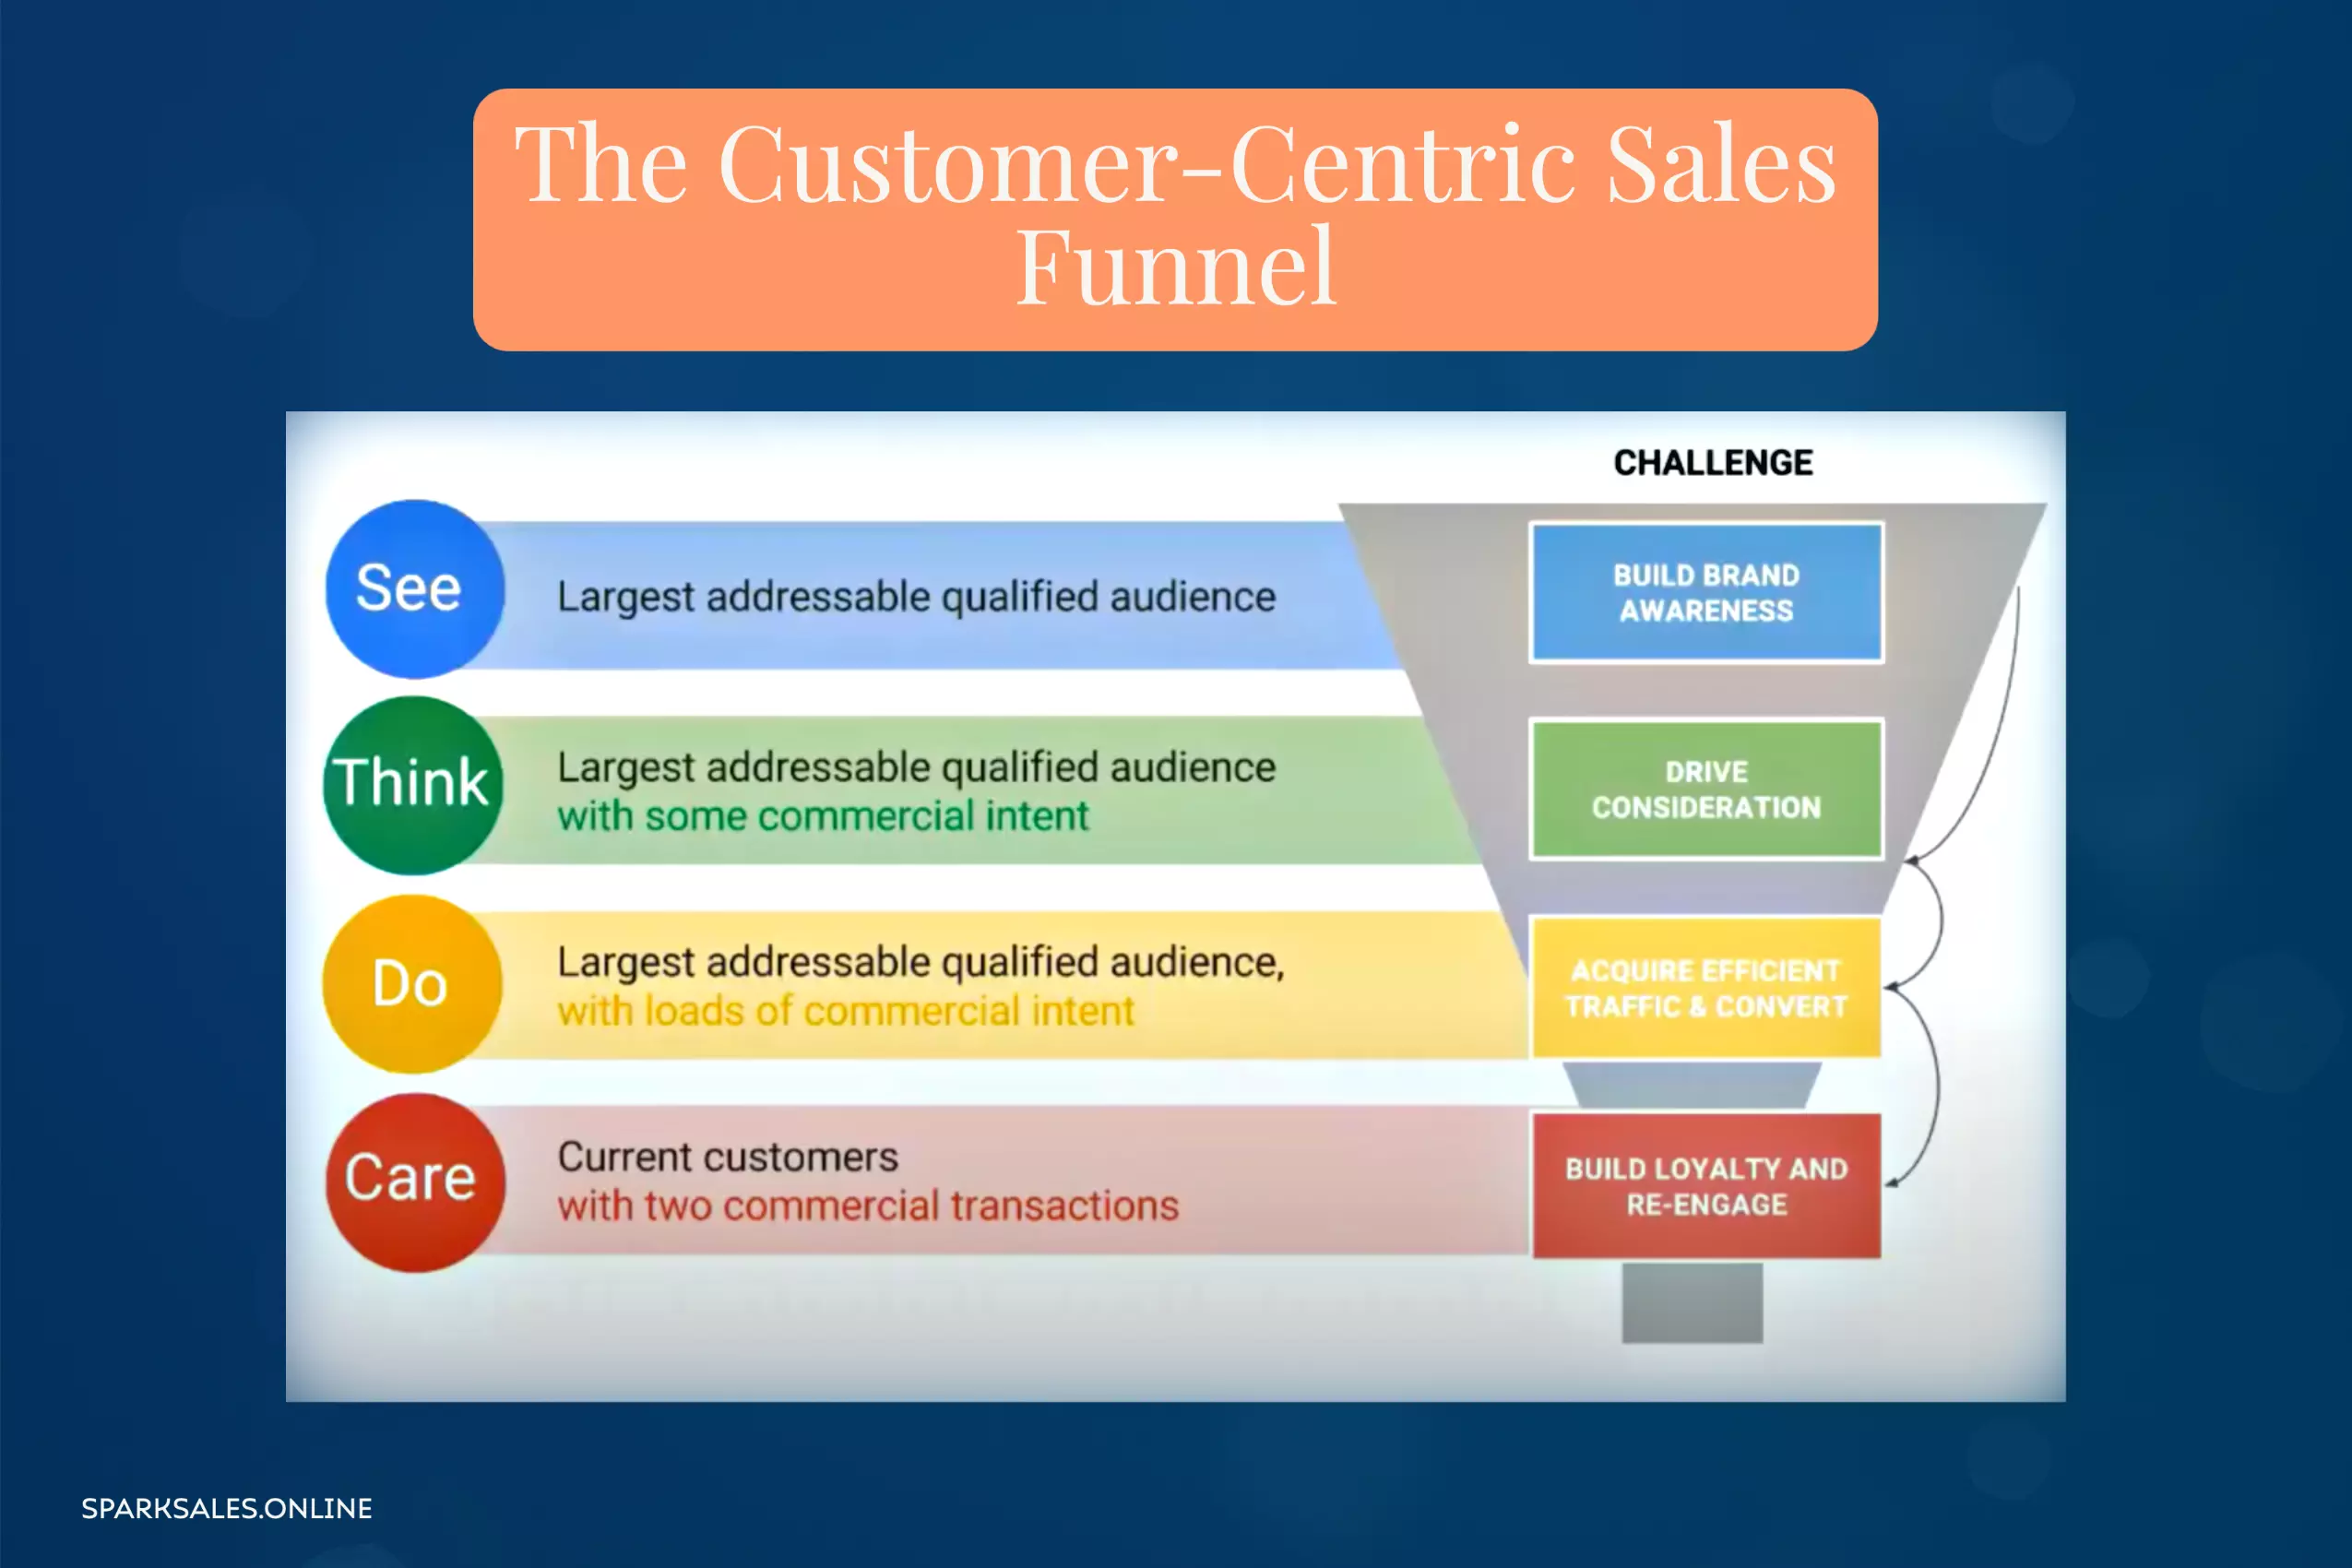 The Customer-Centric Sales Funnel